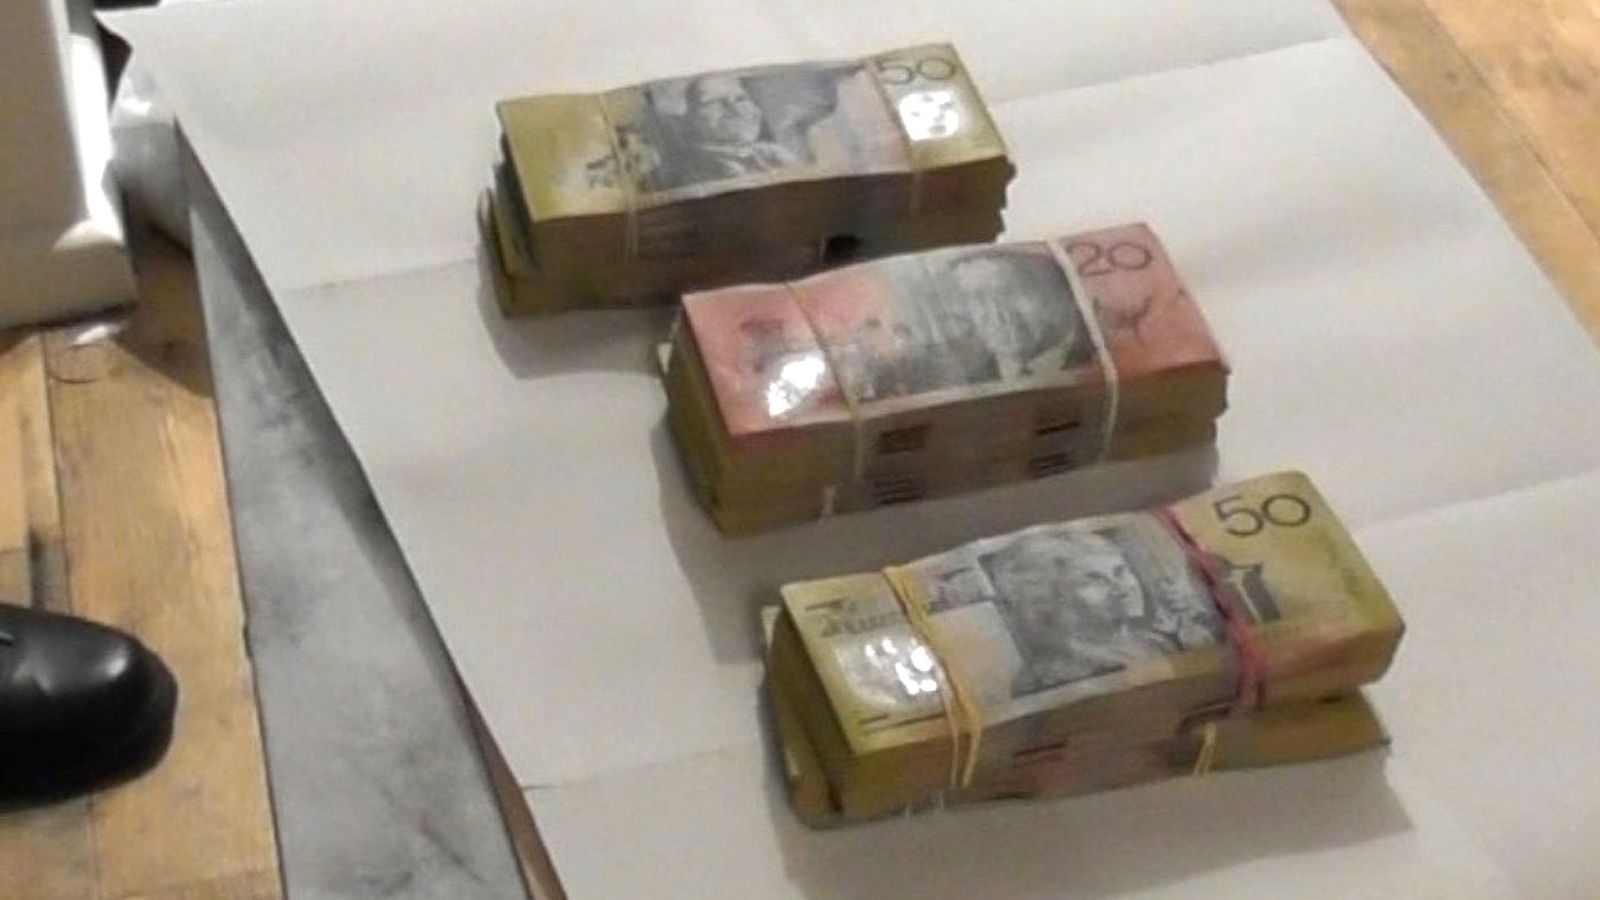 During a search, officers located and seized almost $1.15 million in cash – some of which was found in a grocery bag.